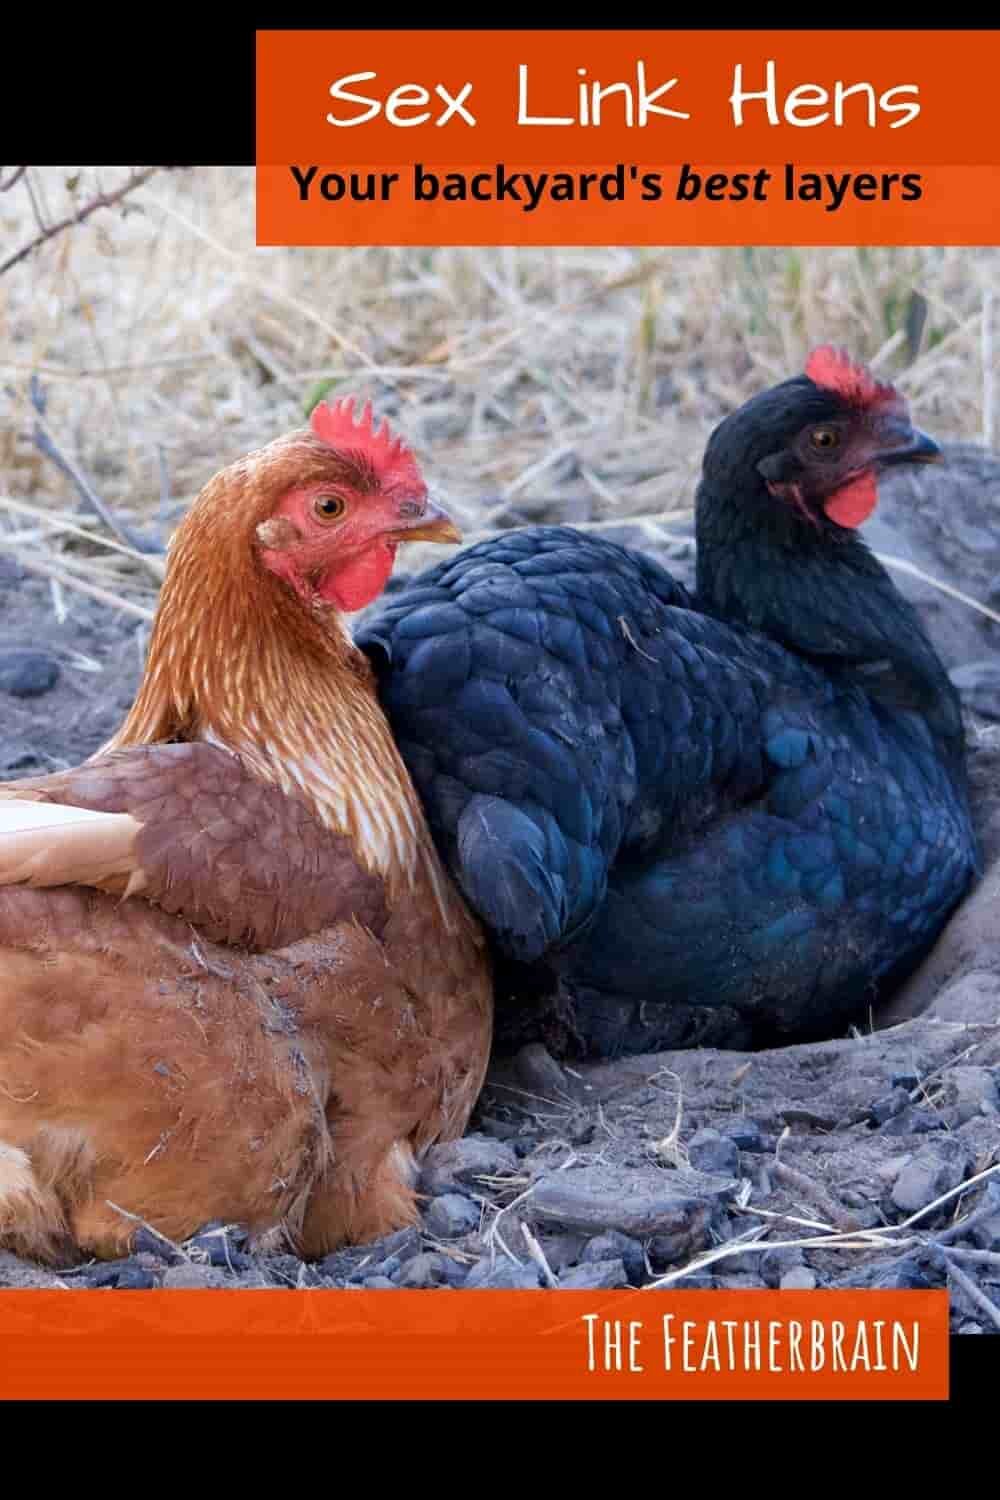 Rooster sex